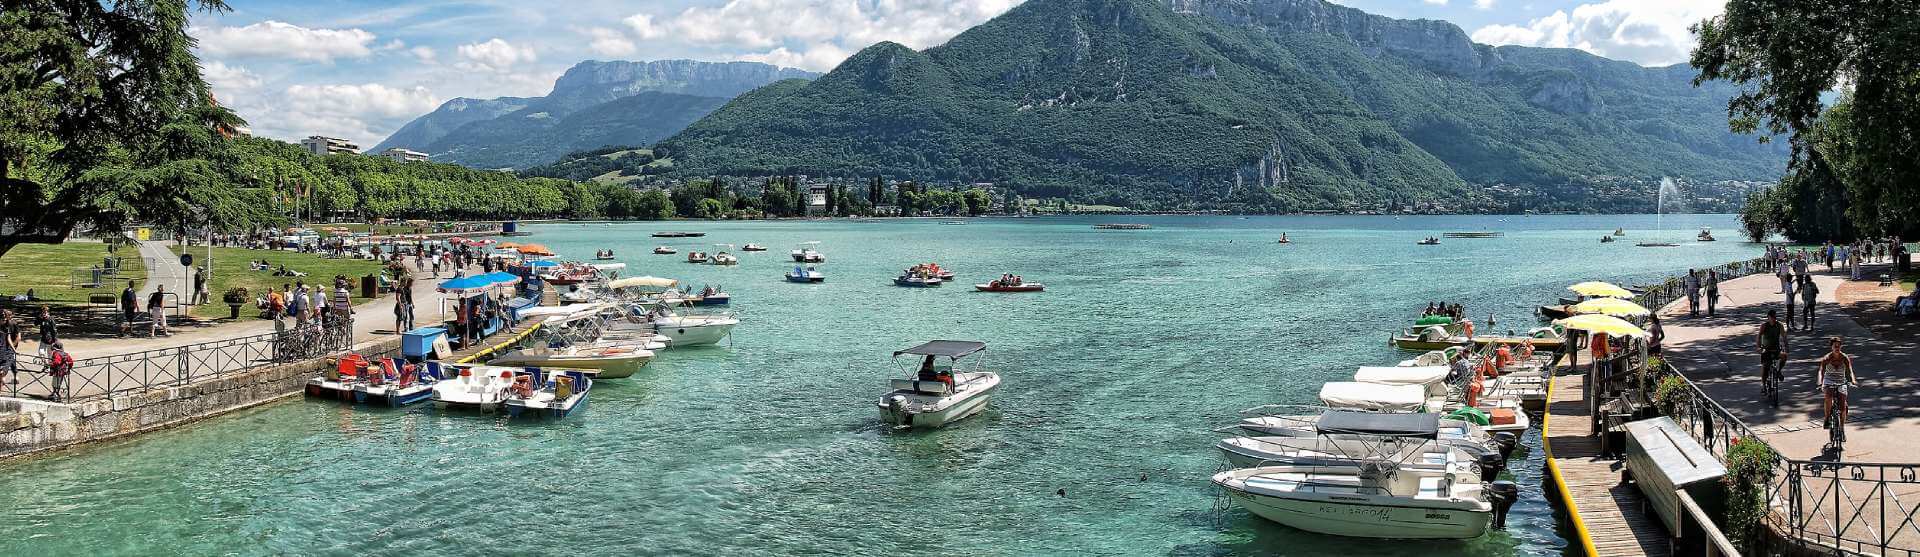 Campasun : Camping Annecy